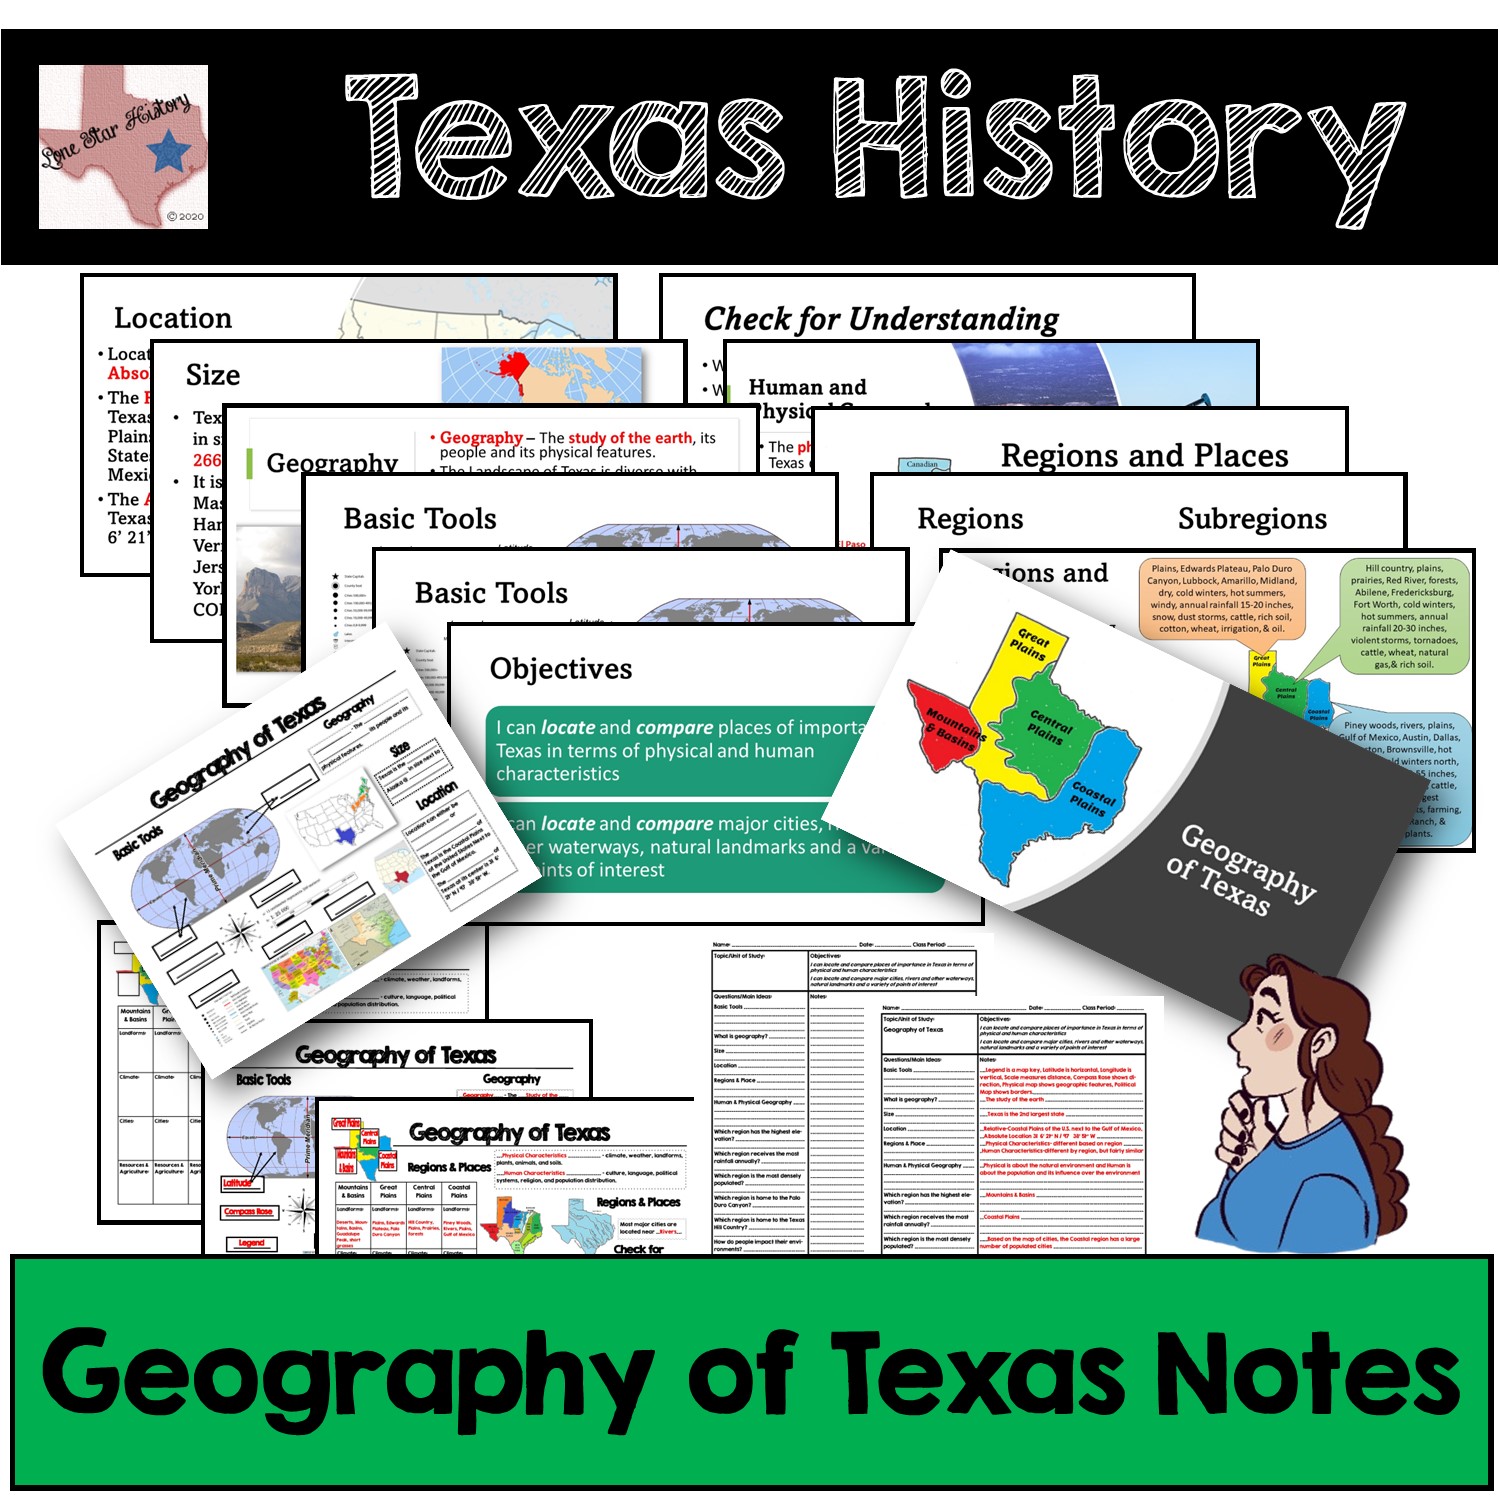 Geography of Texas Notes - Texas History